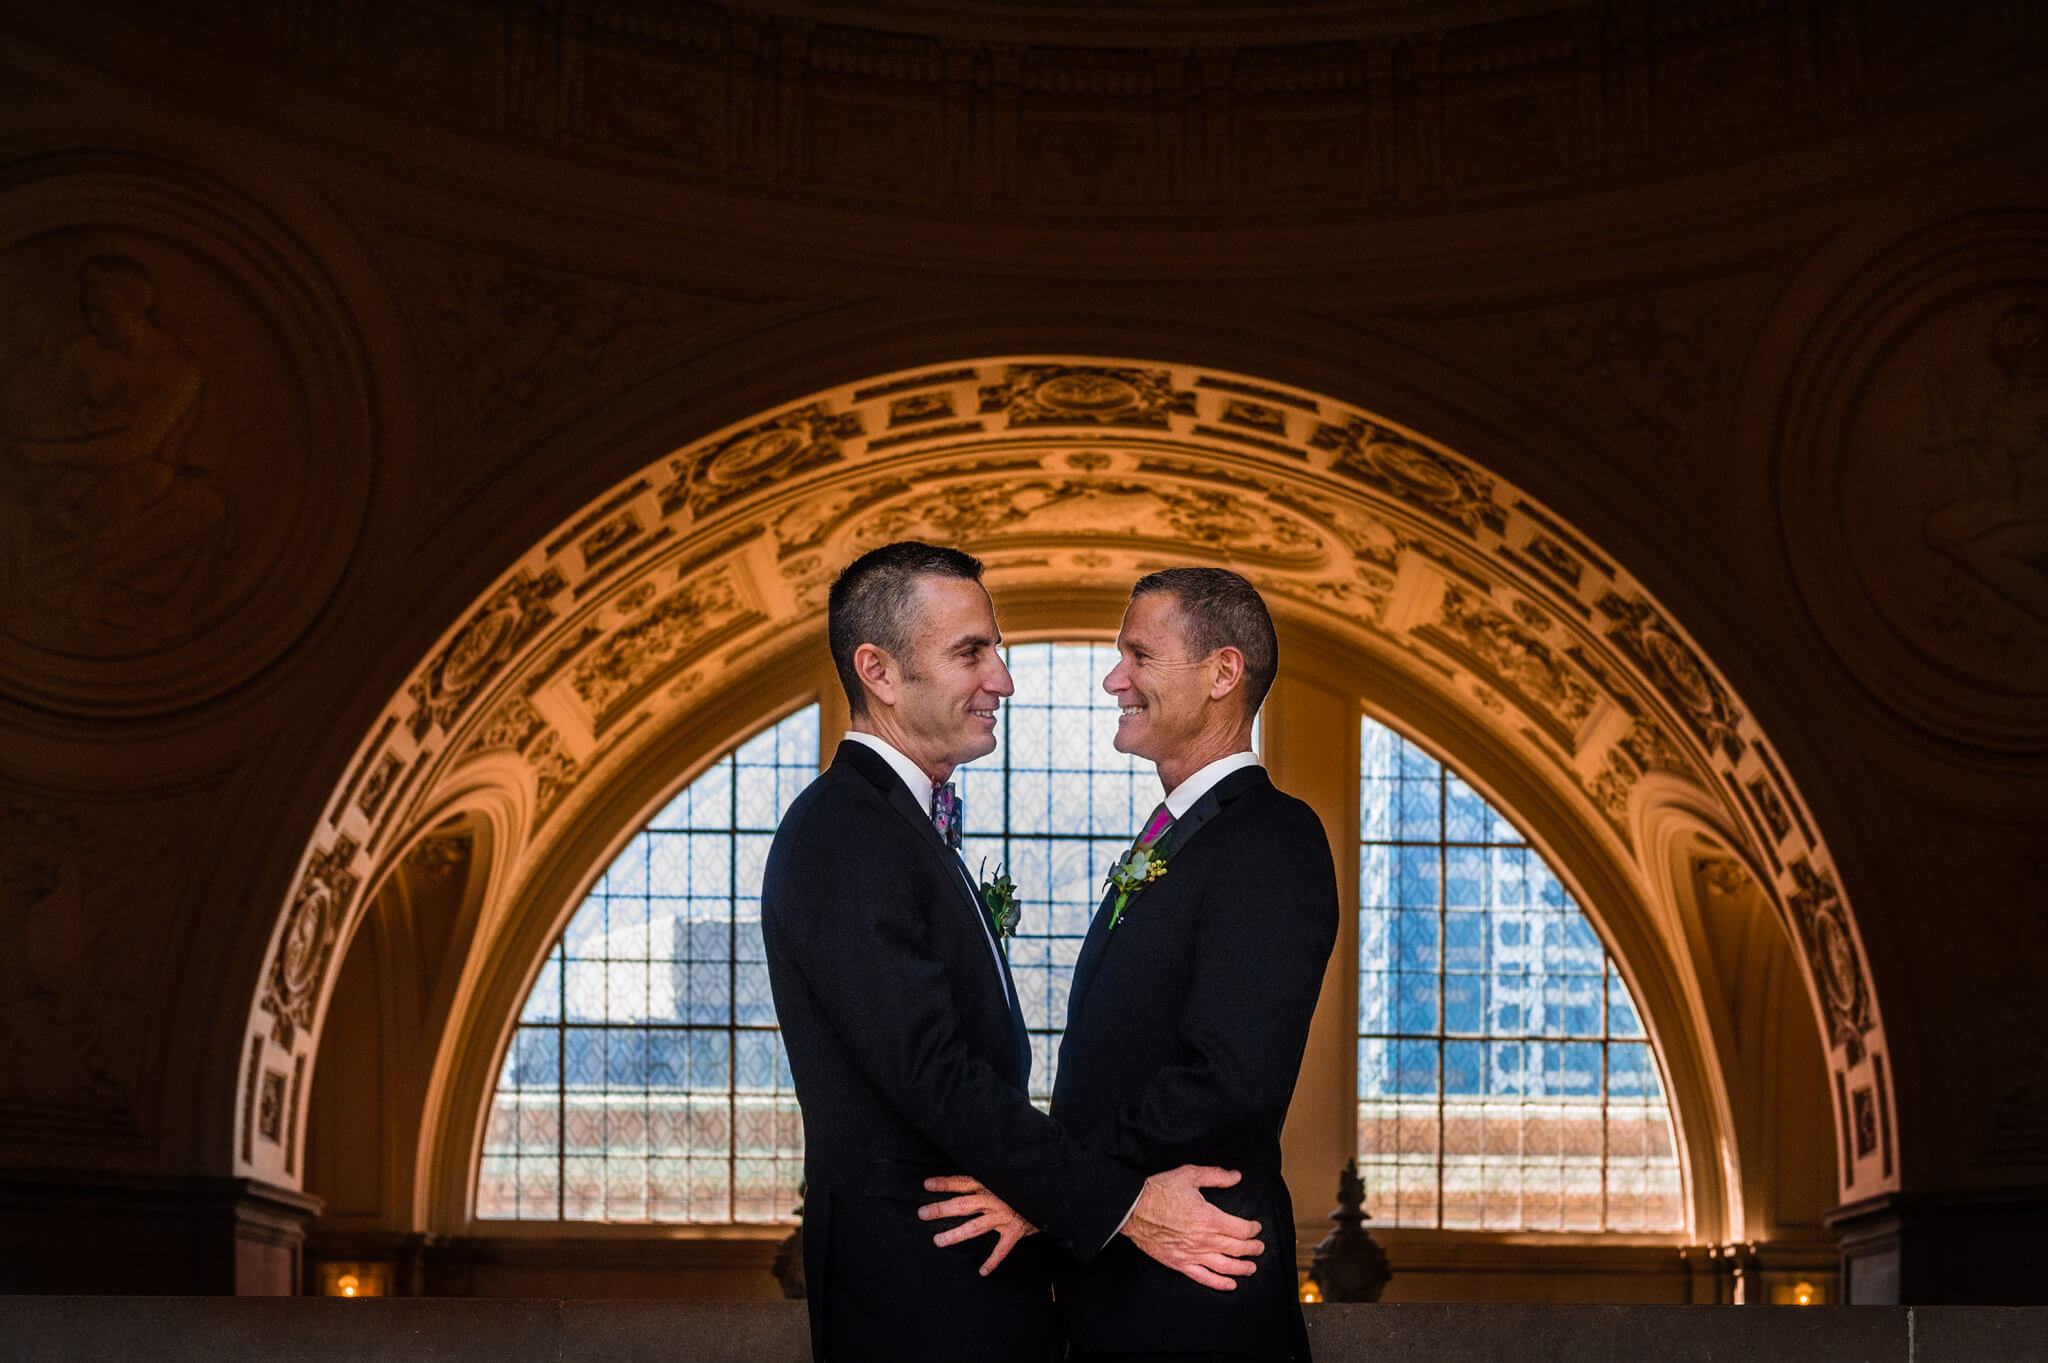 Two newlyweds smile at each other after same-sex marriage at San Francisco City Hall